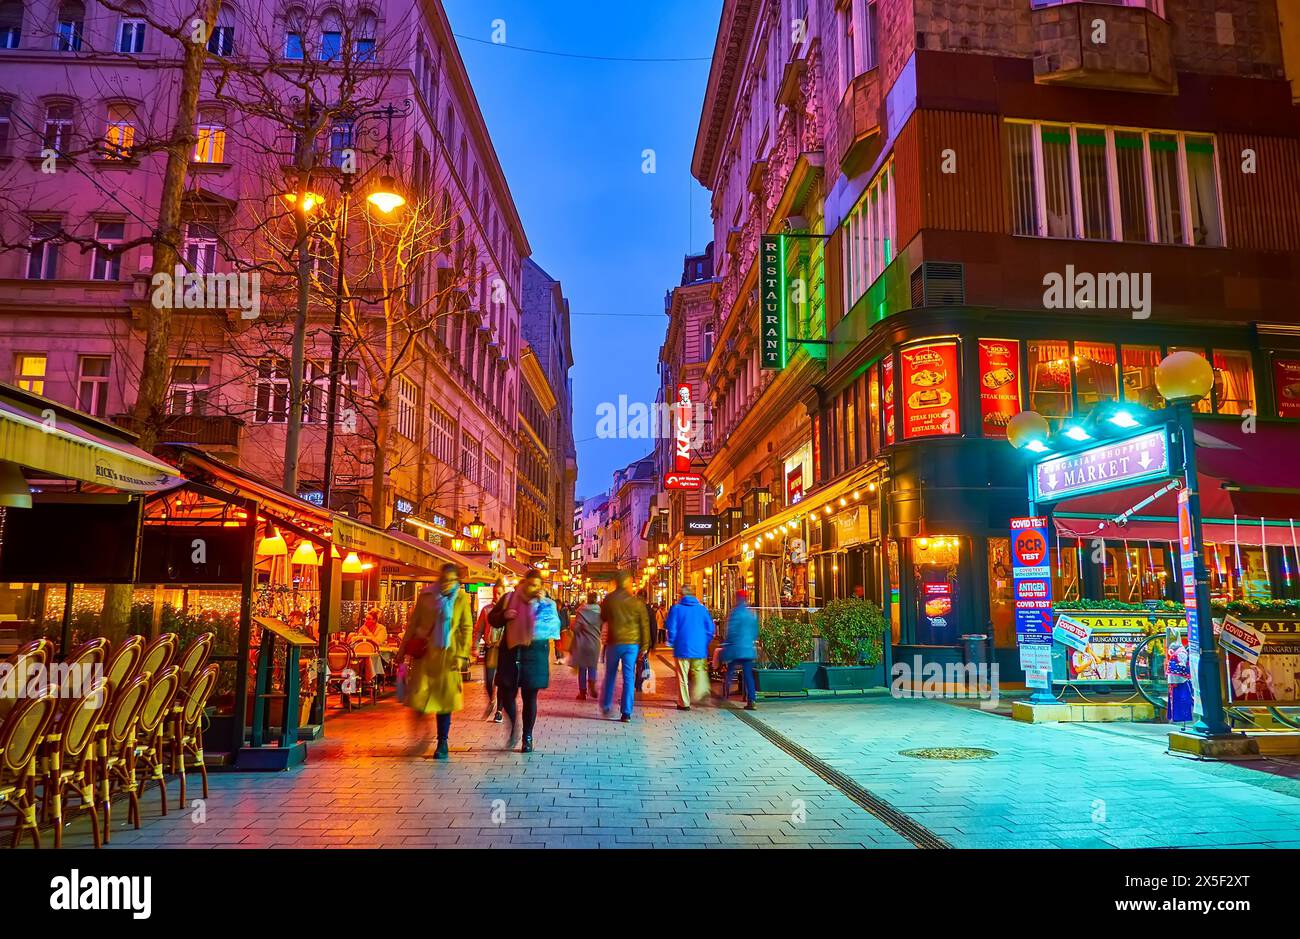 BUDAPEST, HUNGARY - MARCH 3, 2022: Enjoy the evening walk on tourist Vaci Street, famous for its restaurants, cafes, bars and souvenir shops, Budapest Stock Photo